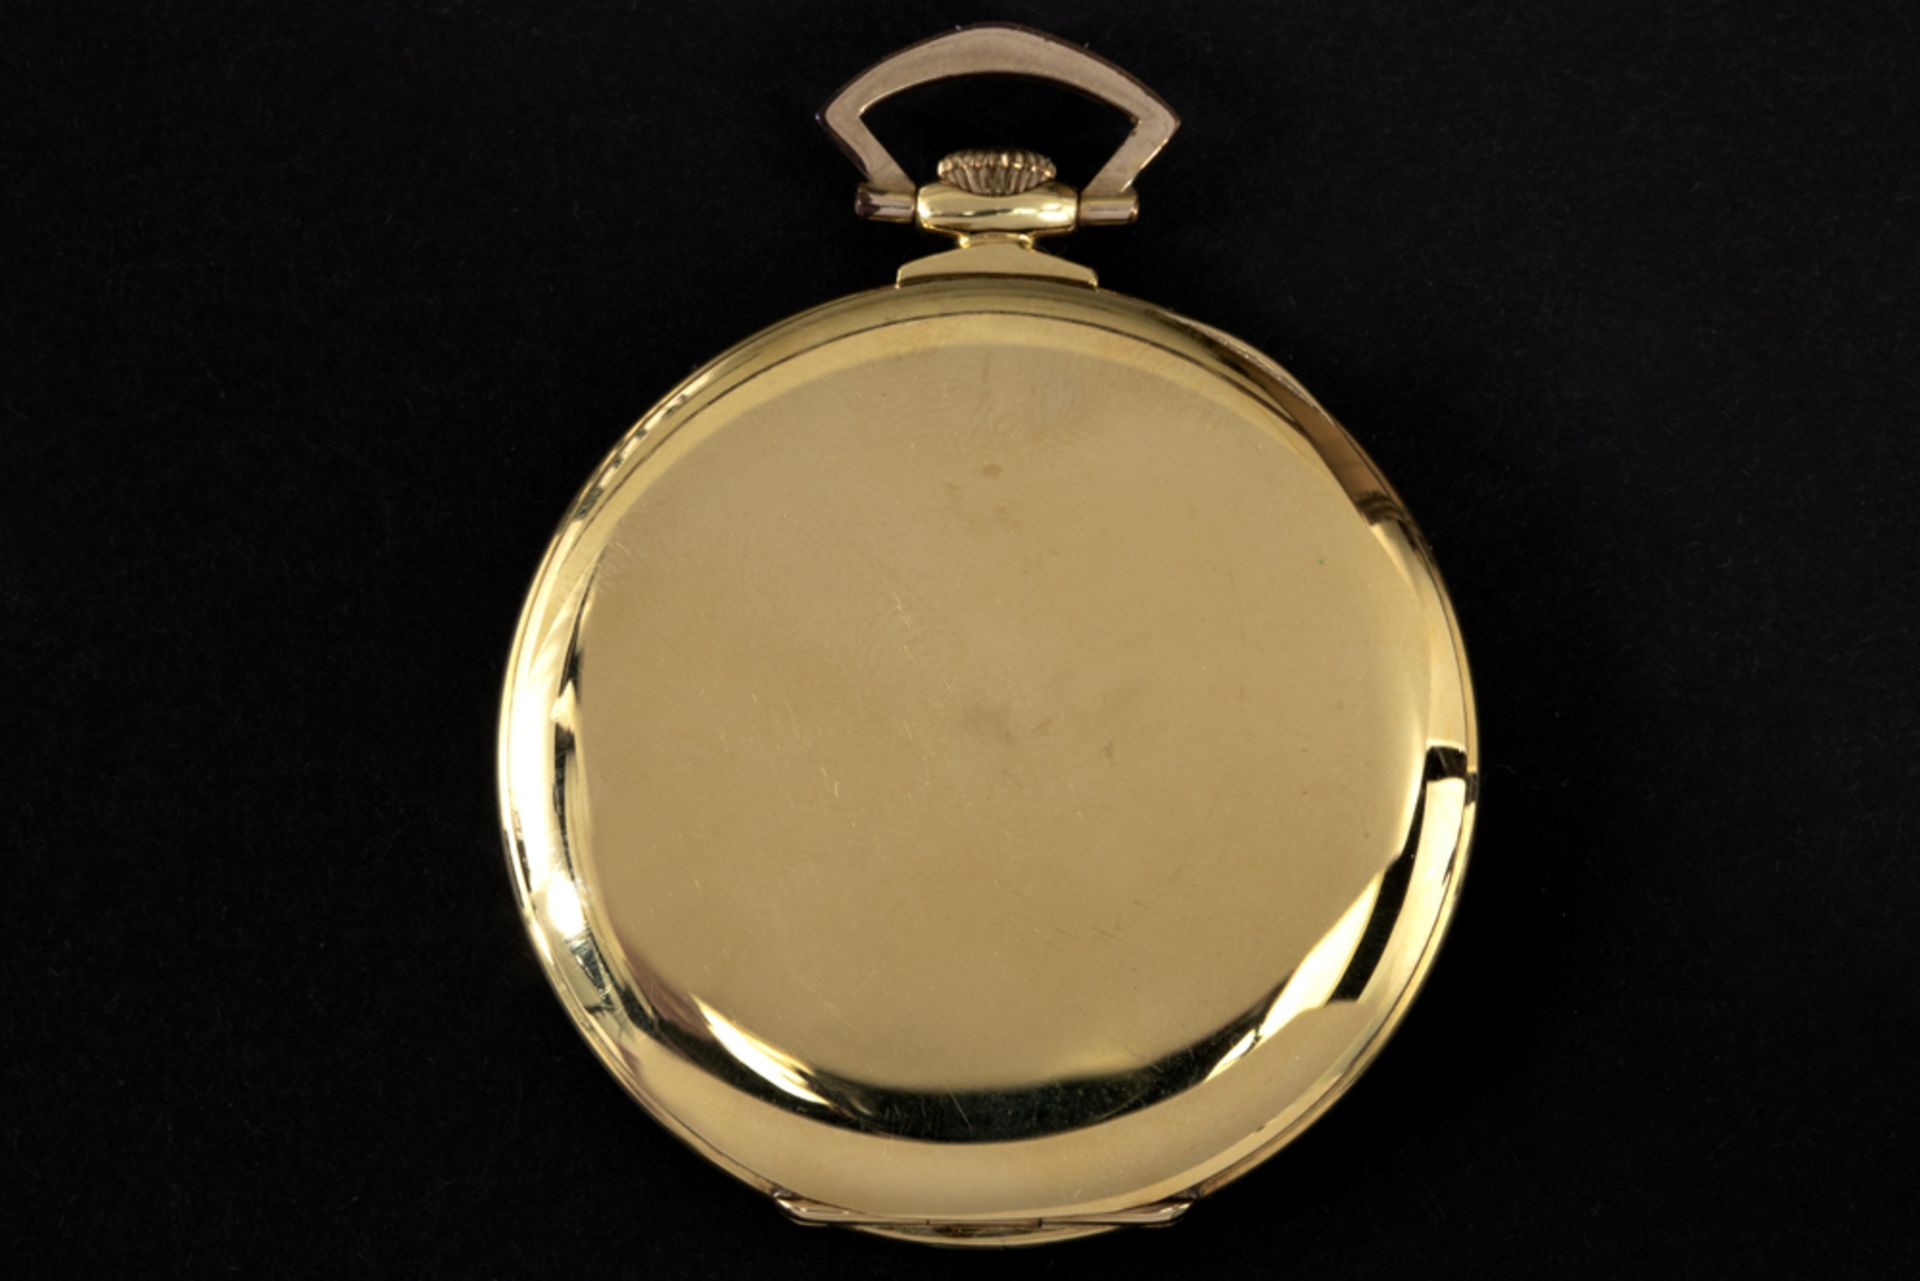 Chronomètre marked pocket watch with its case in yellow gold (18 carat) || CHRONOMETRE zakhorloge - Image 2 of 4